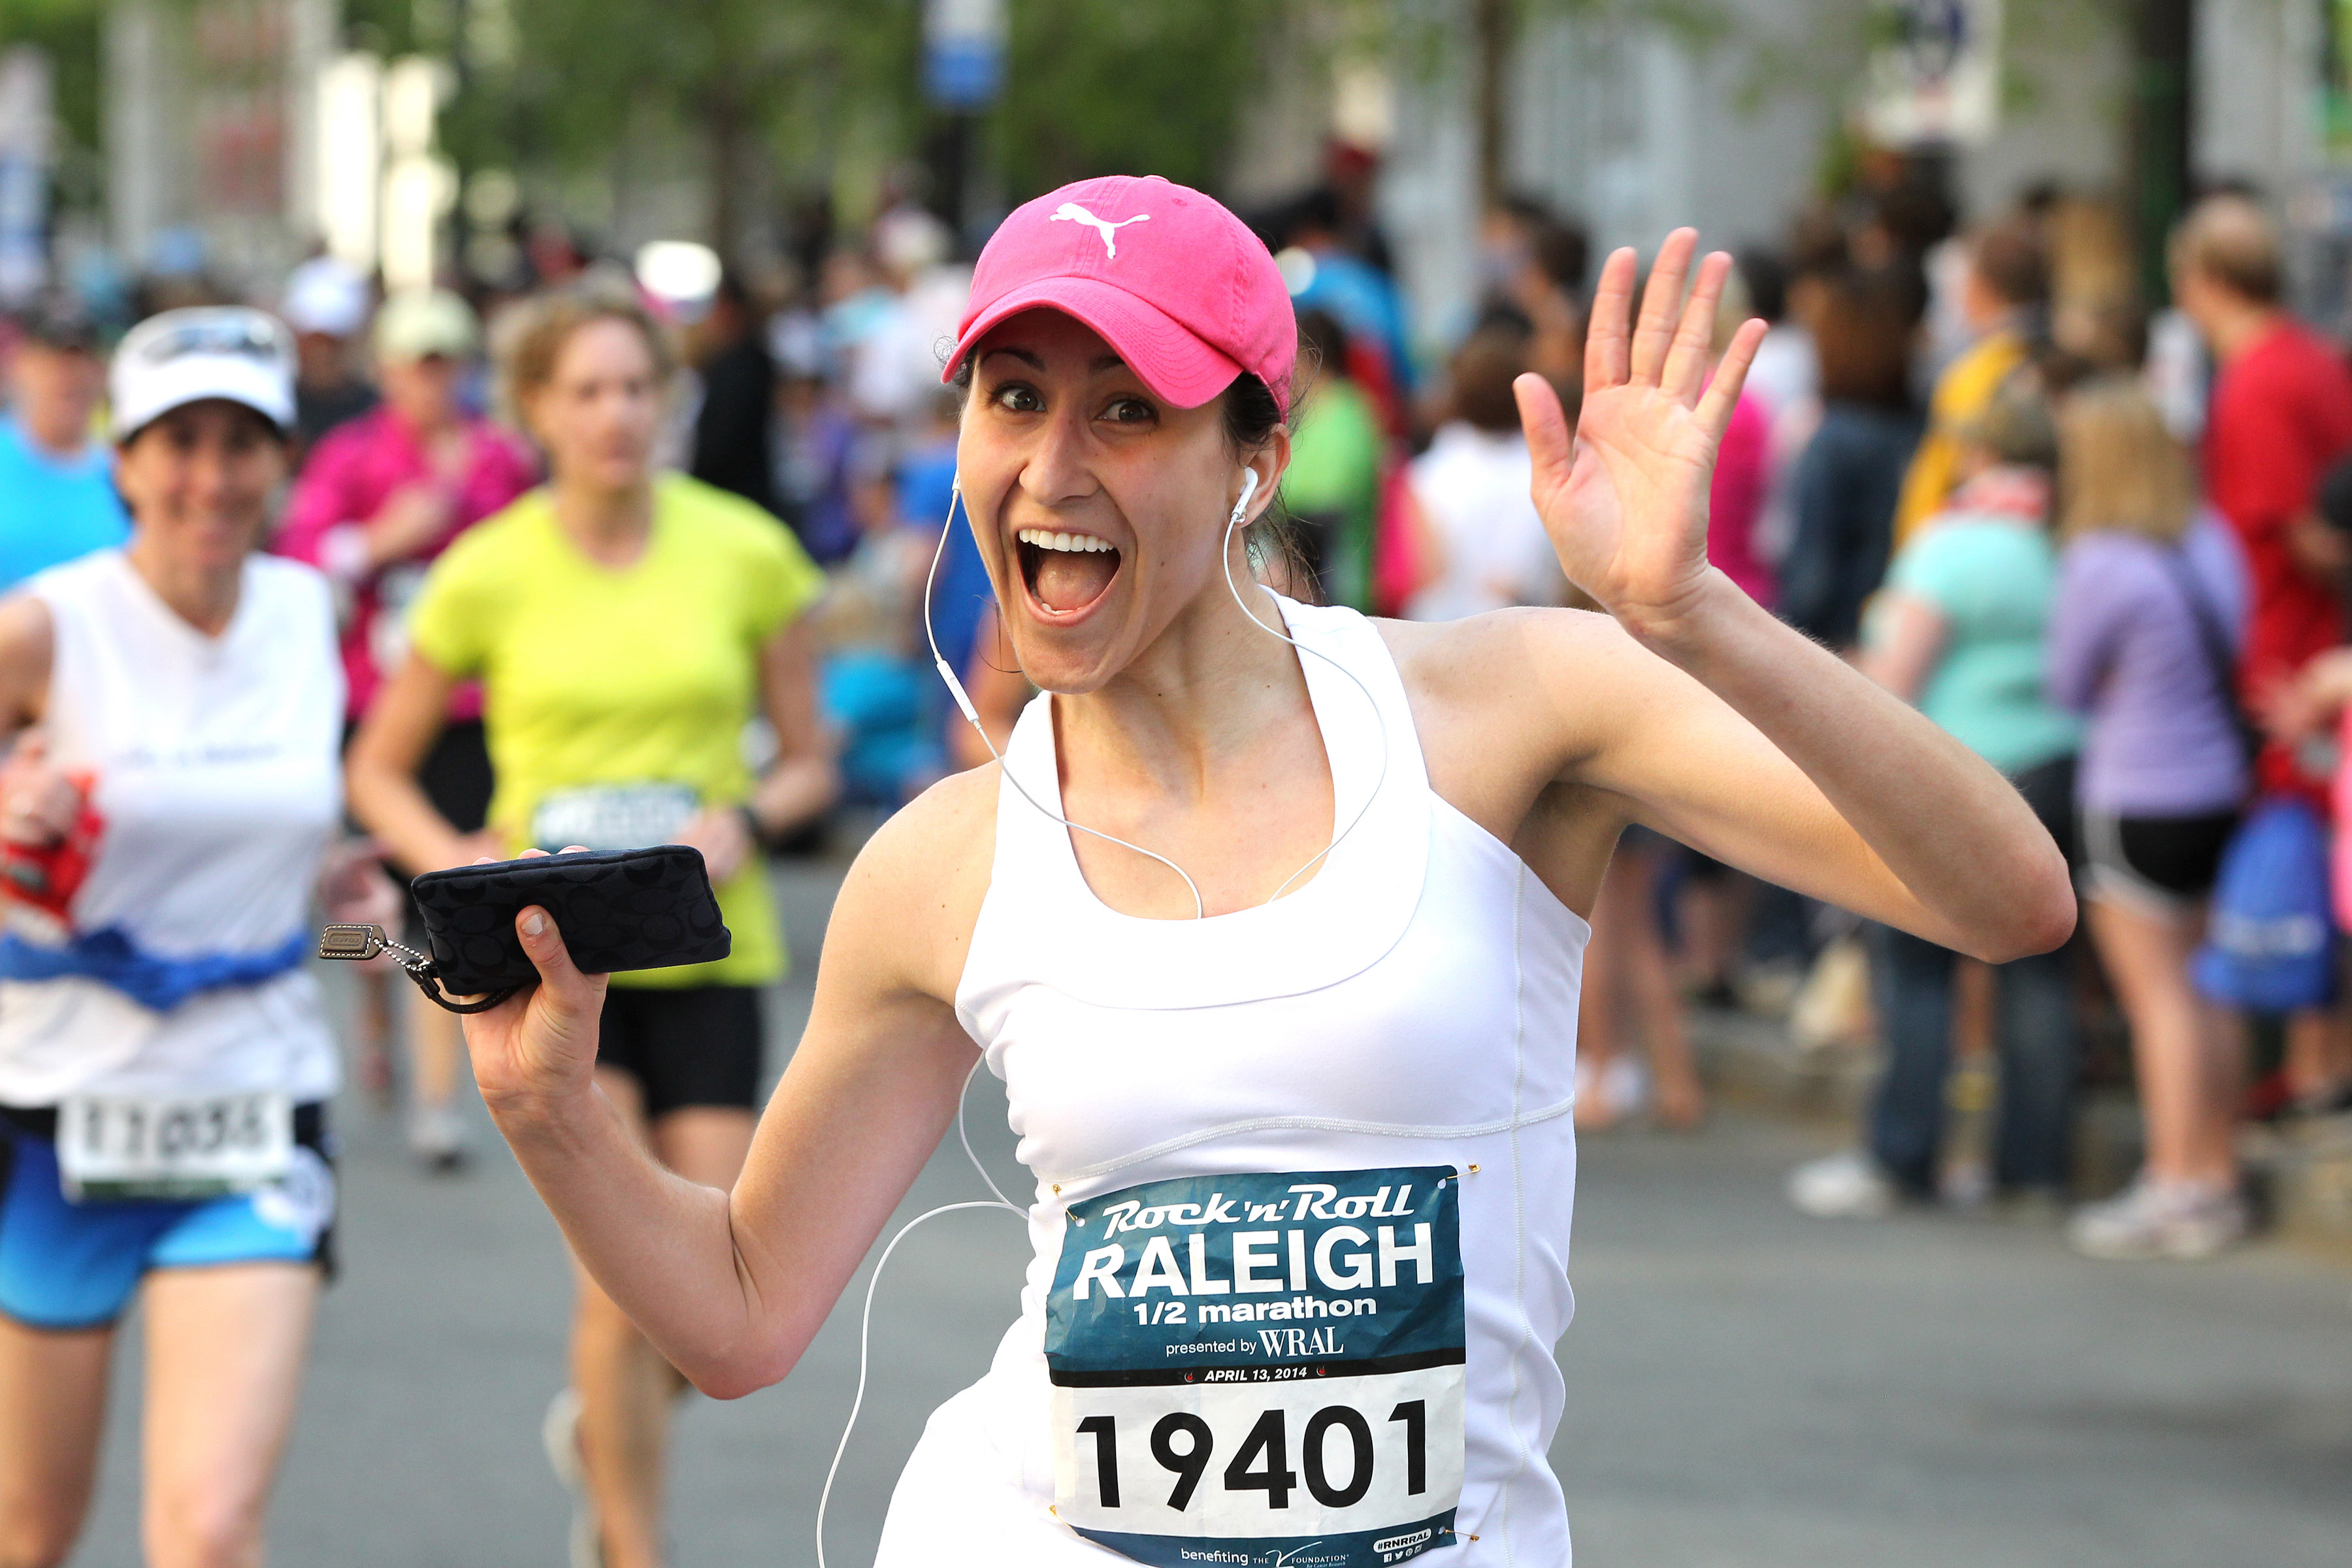 Photos: Runners Rock Raleigh! | Competitor.com